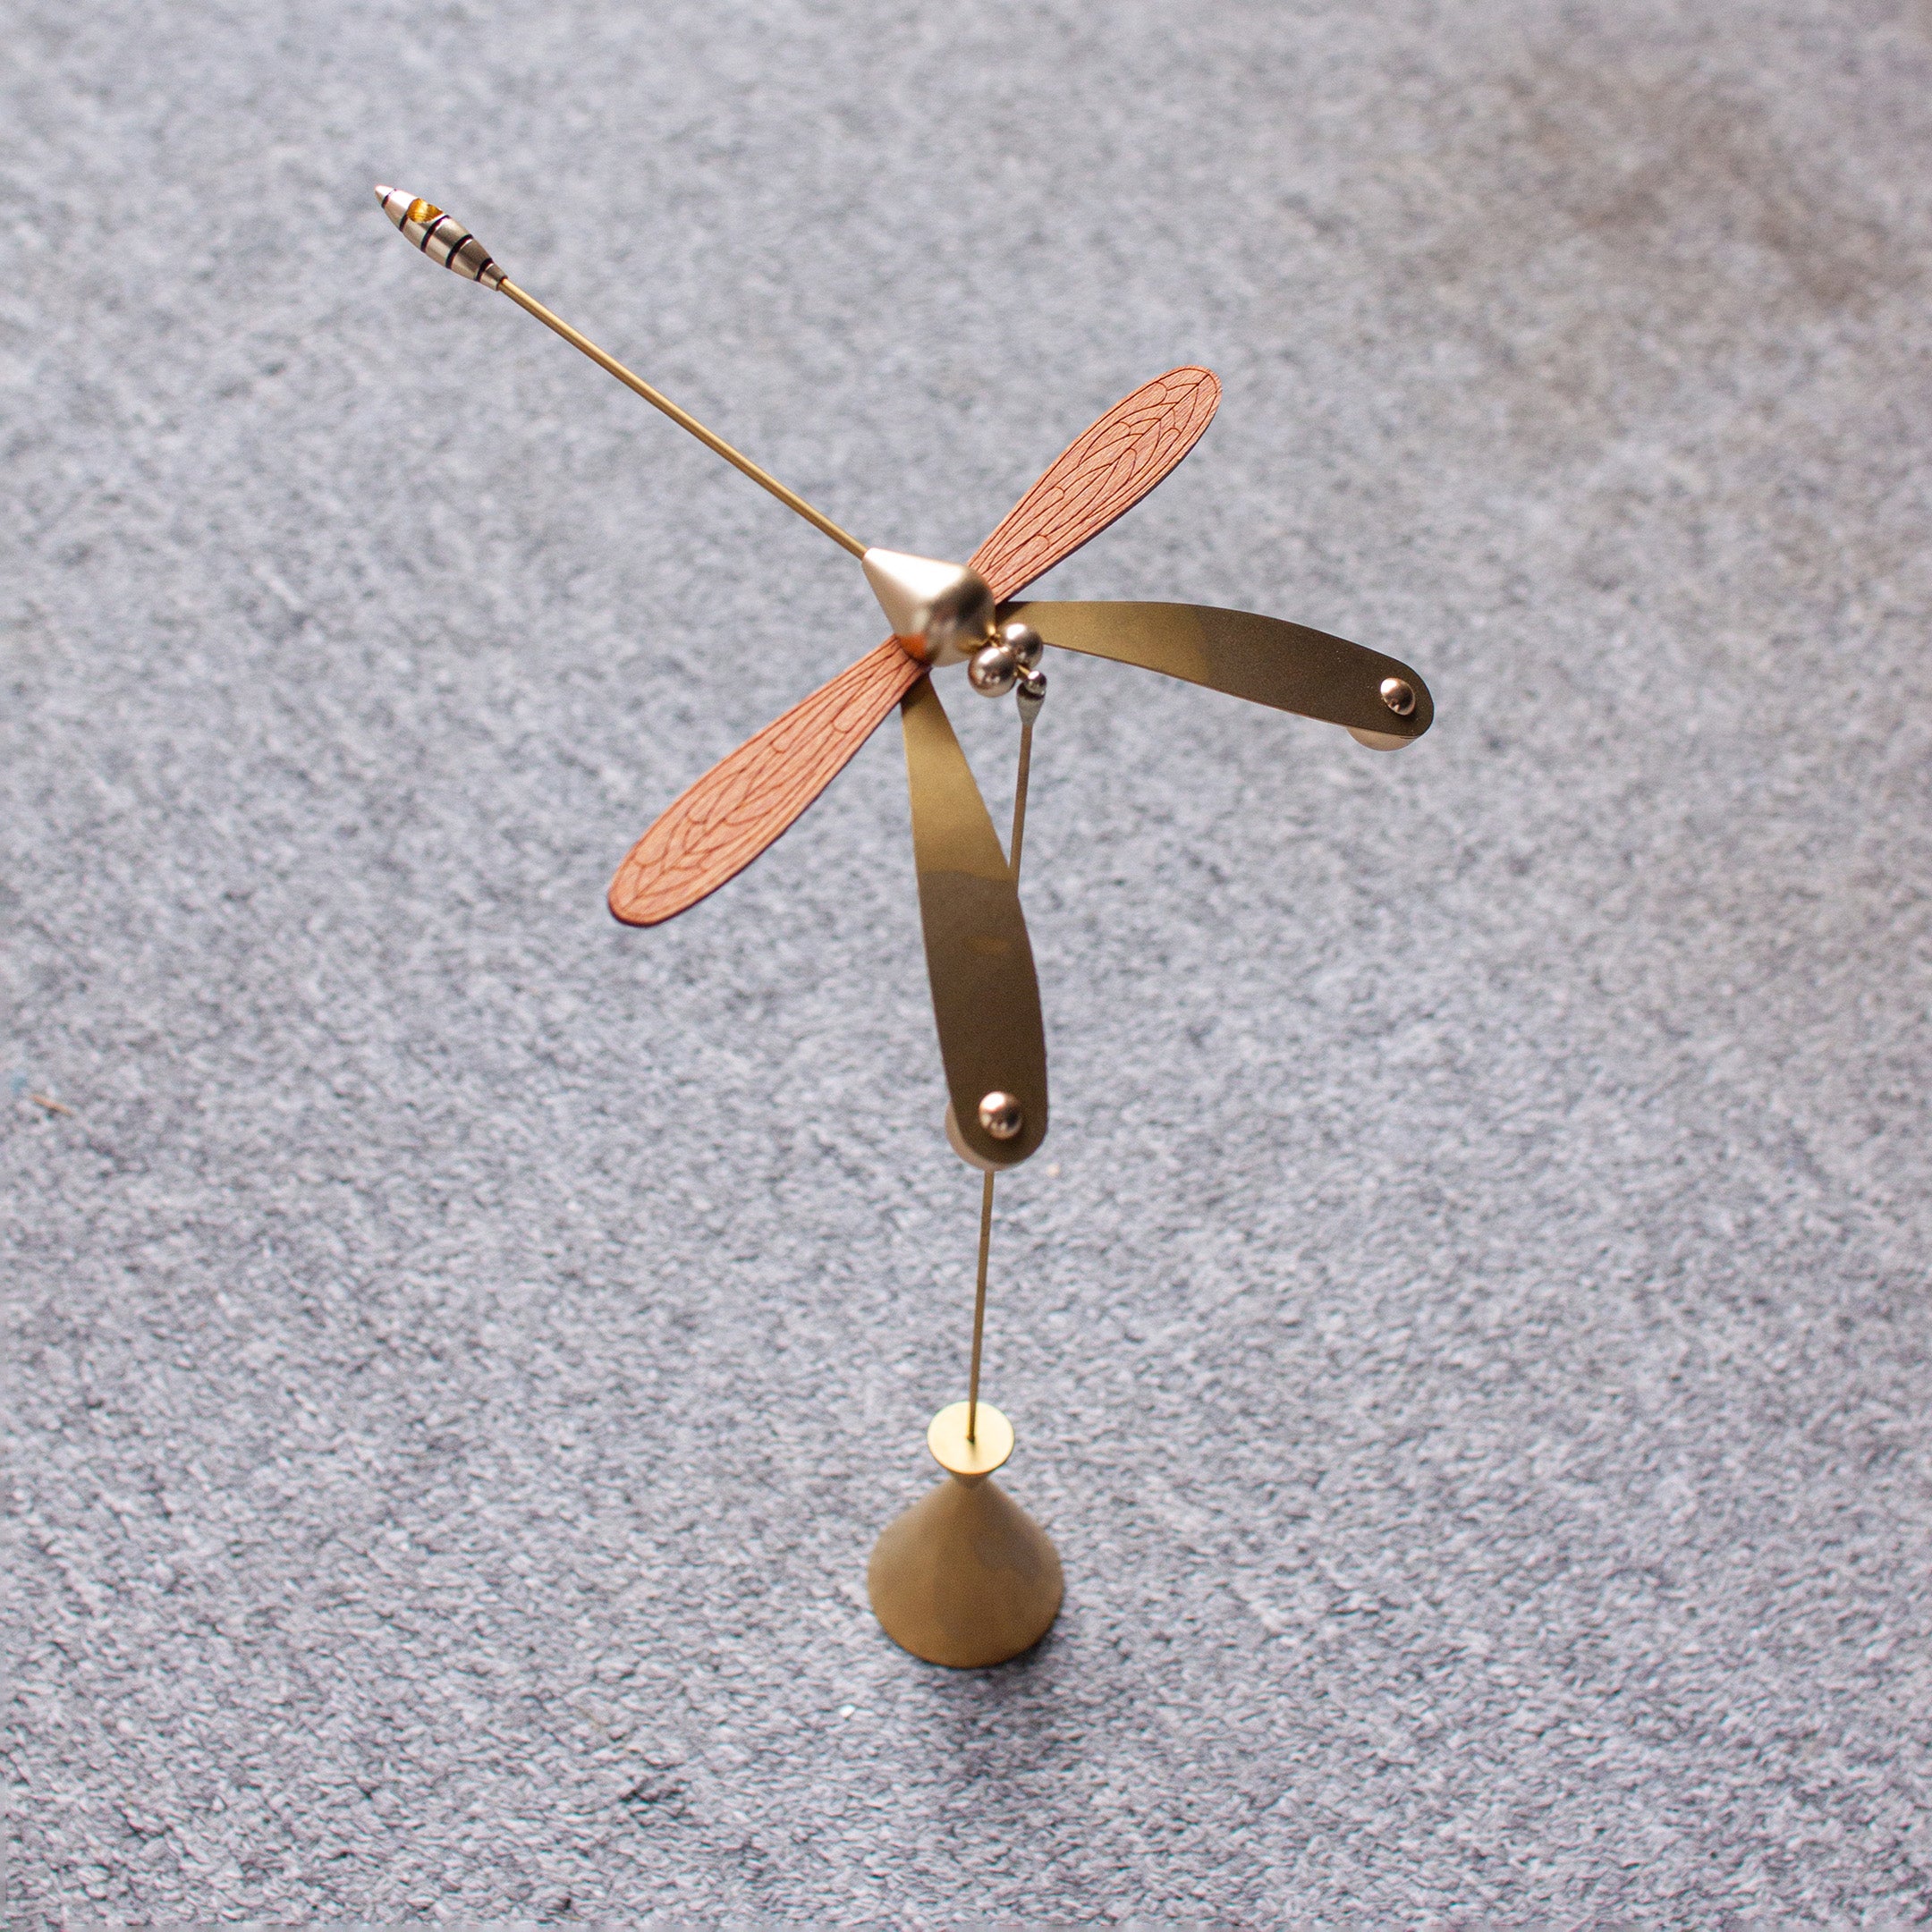 Dragonfly Balance Diffuser Craft Decoration Essential Oil Aromatherapy Base